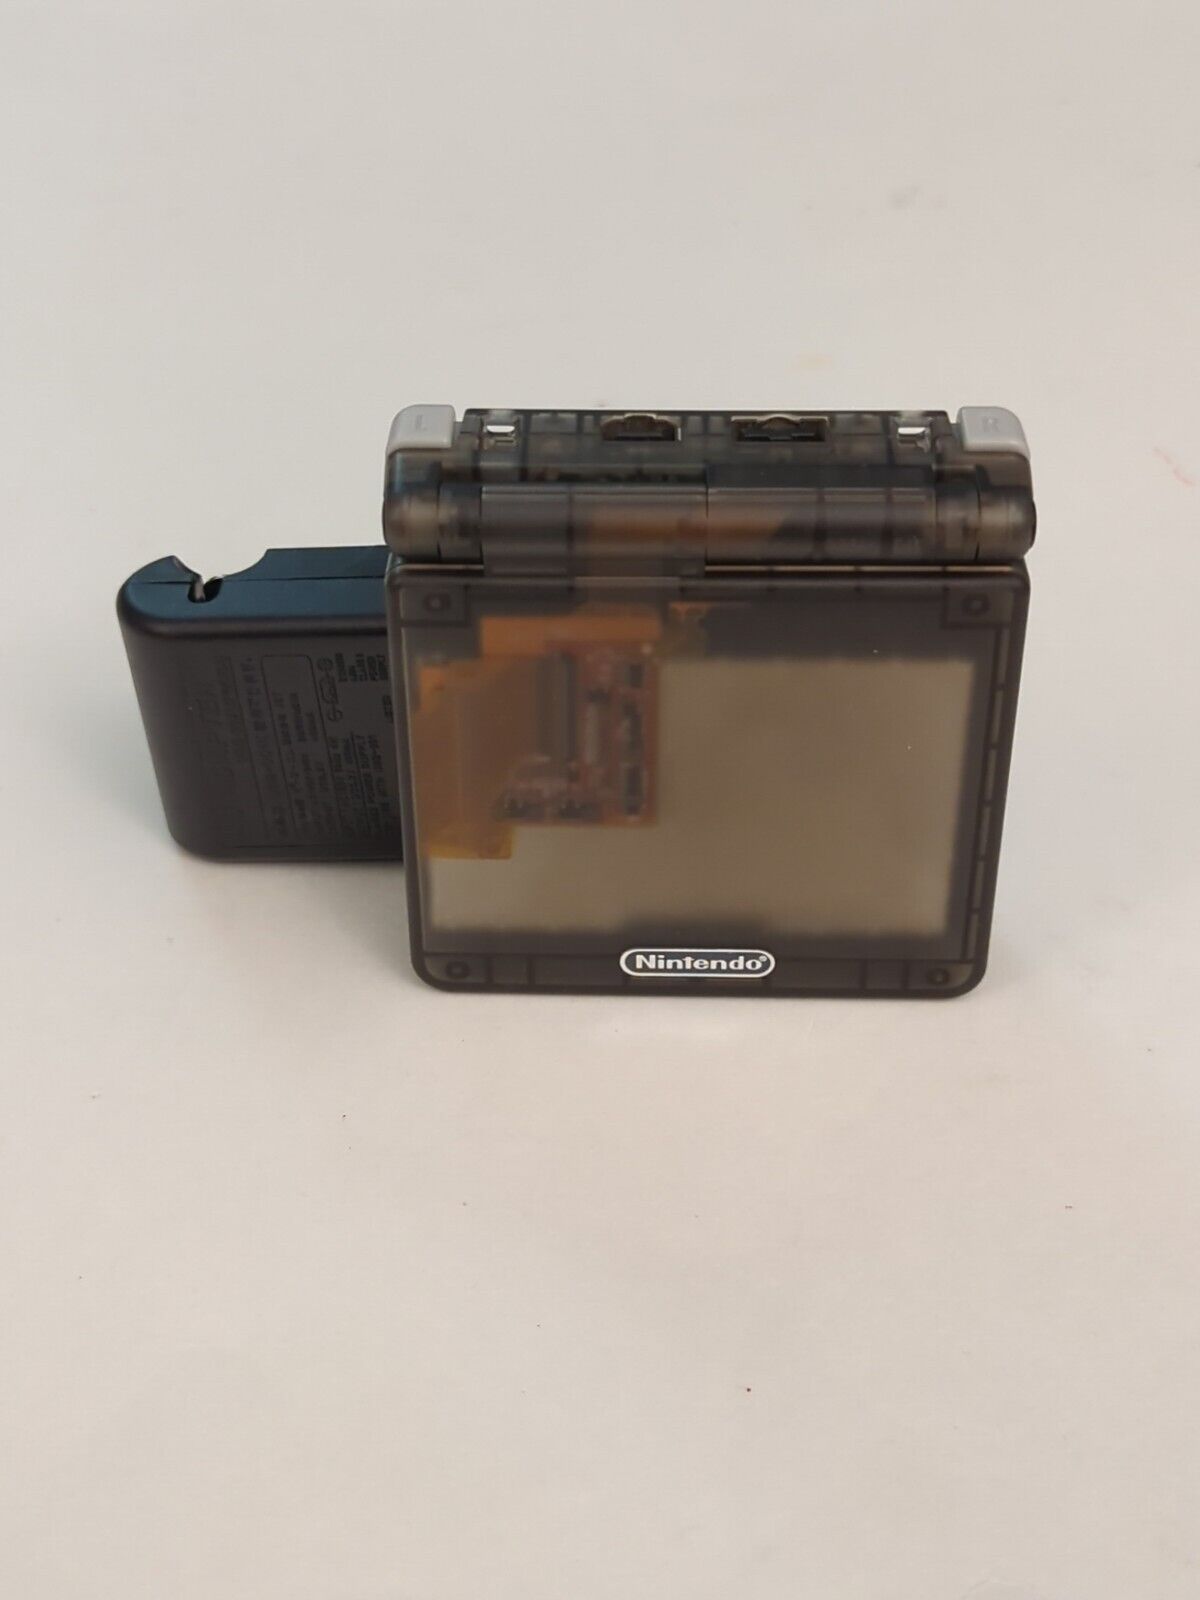 Nintendo Gameboy Advance SP 101 Clear Black Funny Playing IPS backlit screen